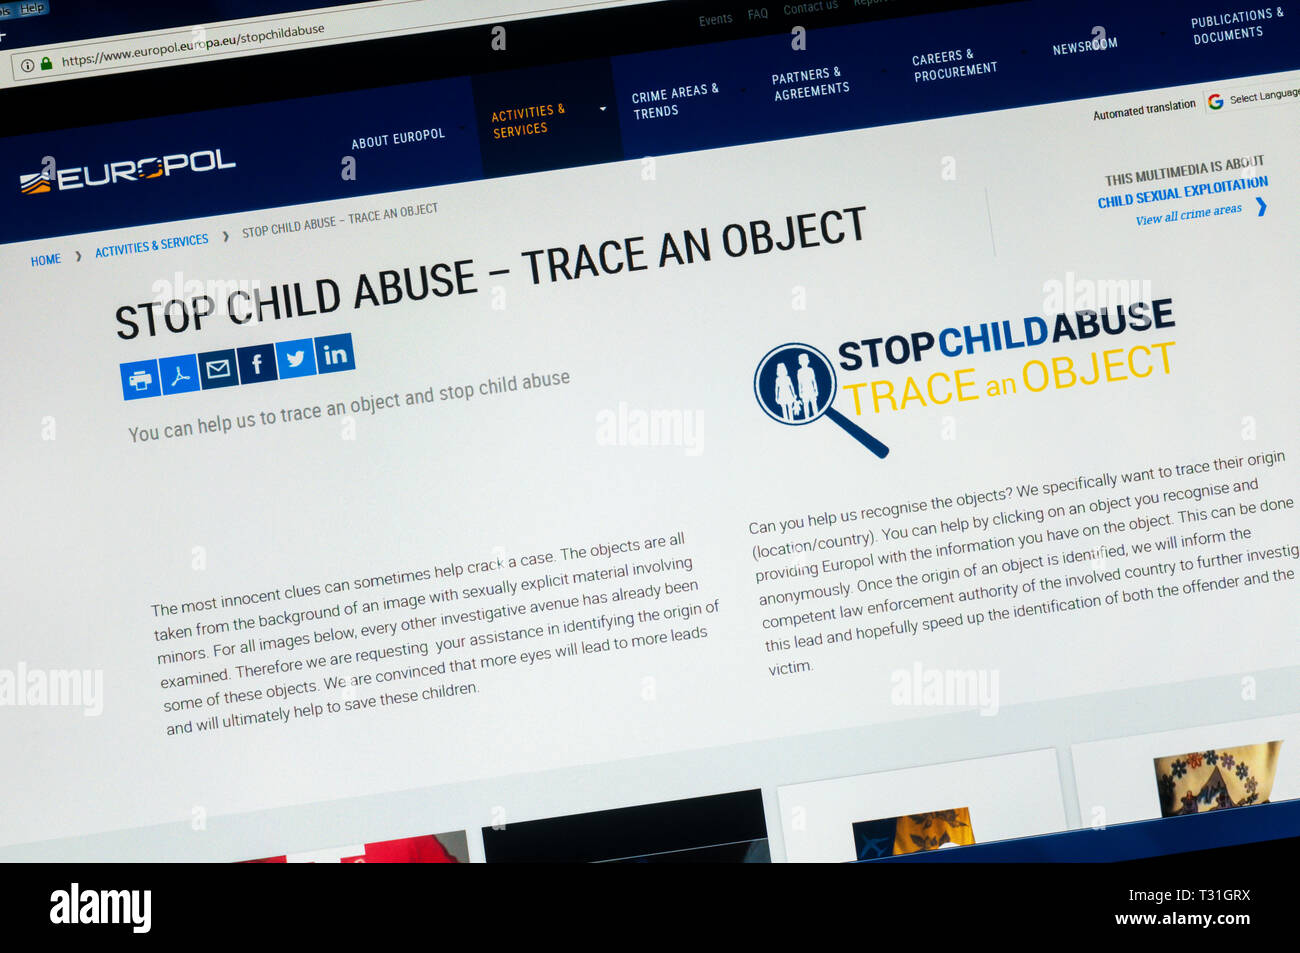 Europol Stop Child Abuse - Trace an Object website. Asks people to help identify objects or places in child abuse videos. Stock Photo